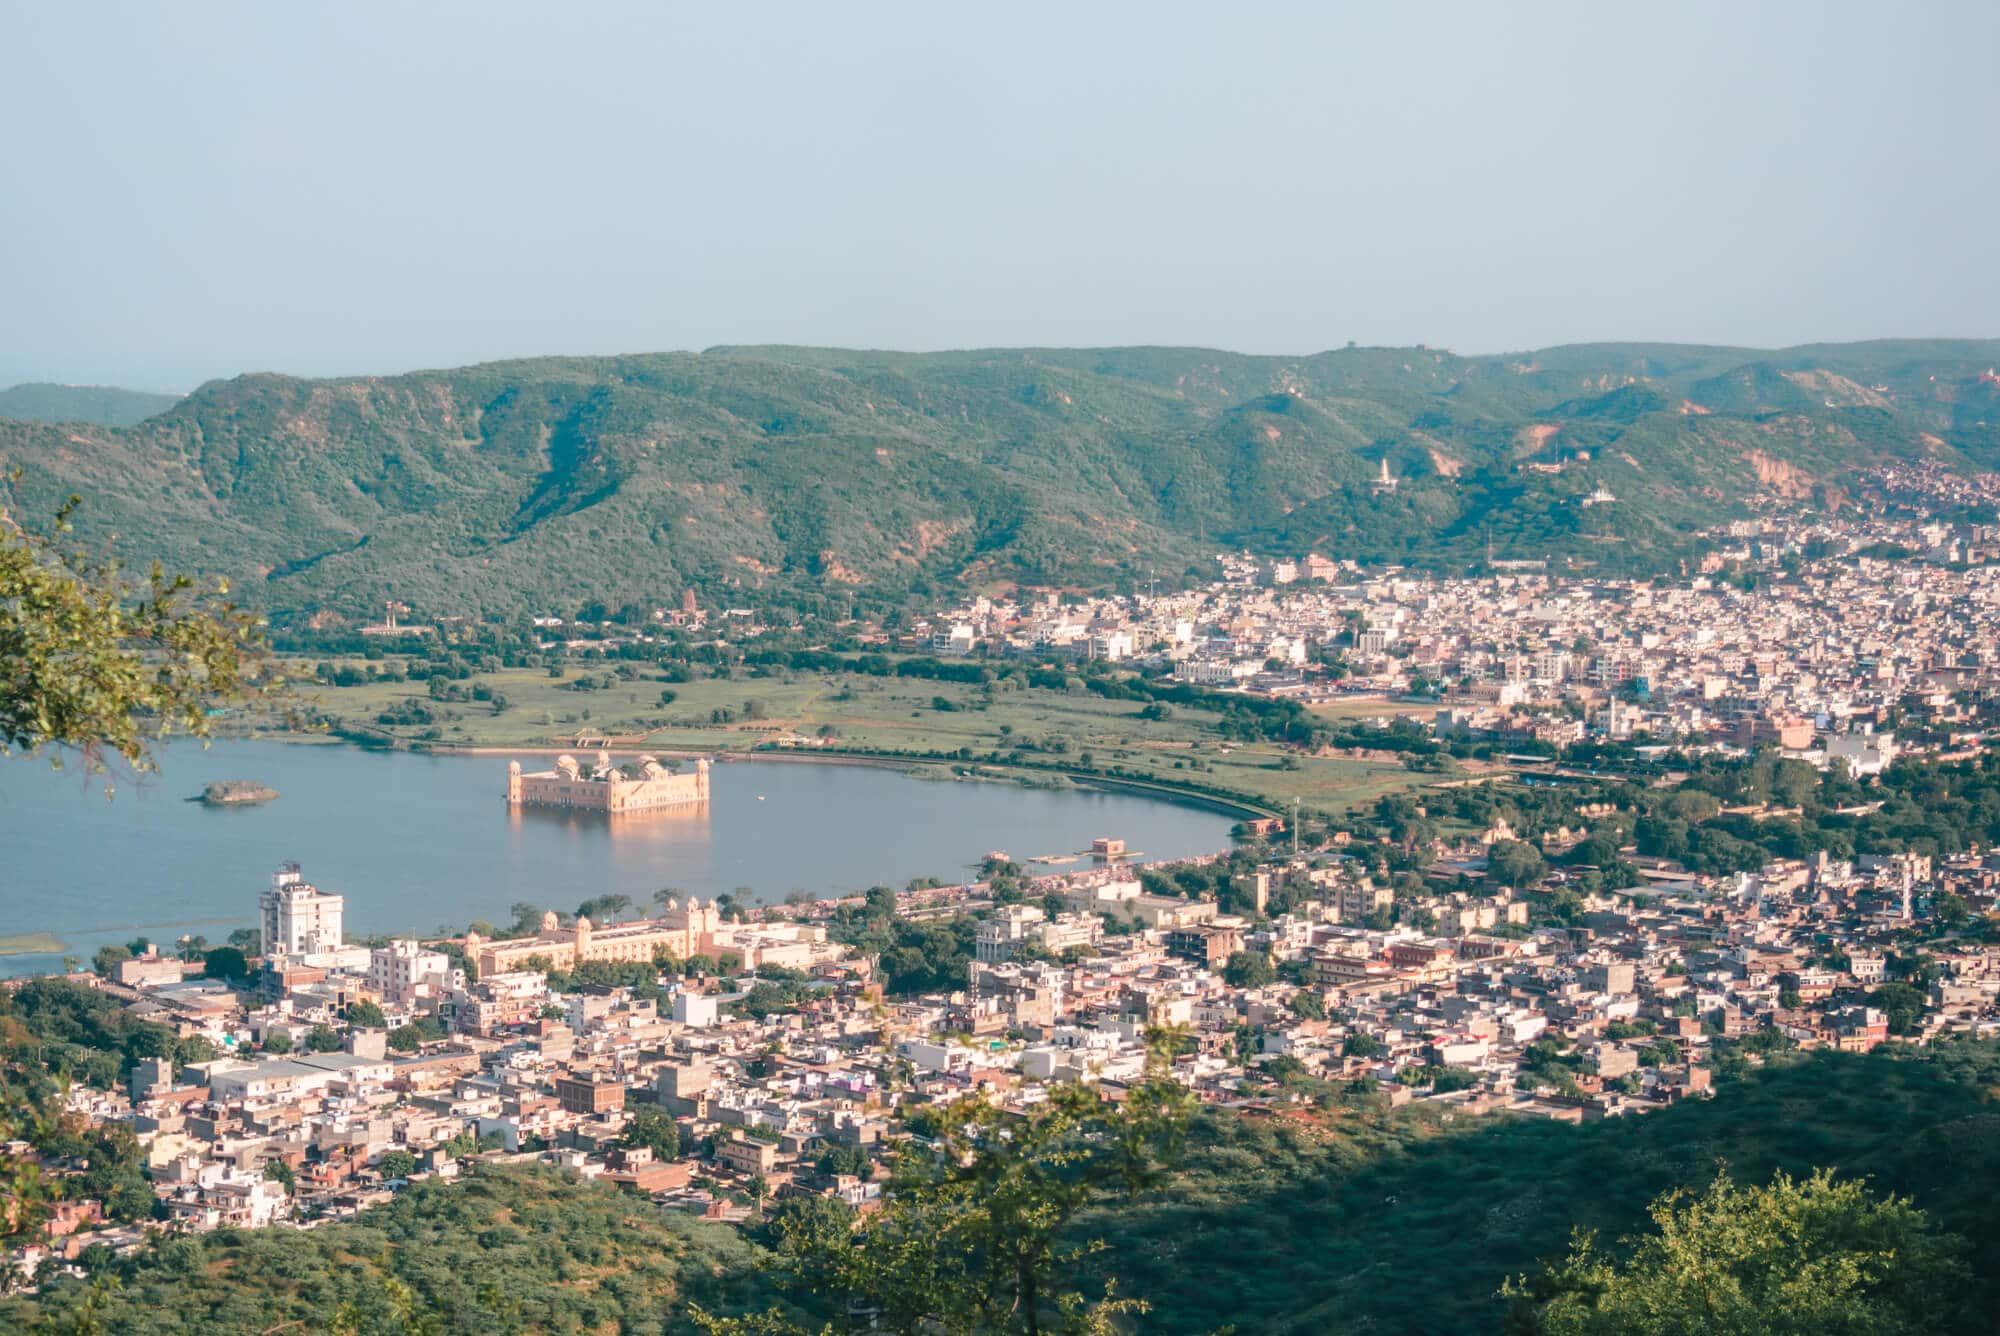 Jal Mahal seen from Nahargarh Fort - The best sunset view point in Jaipur, India